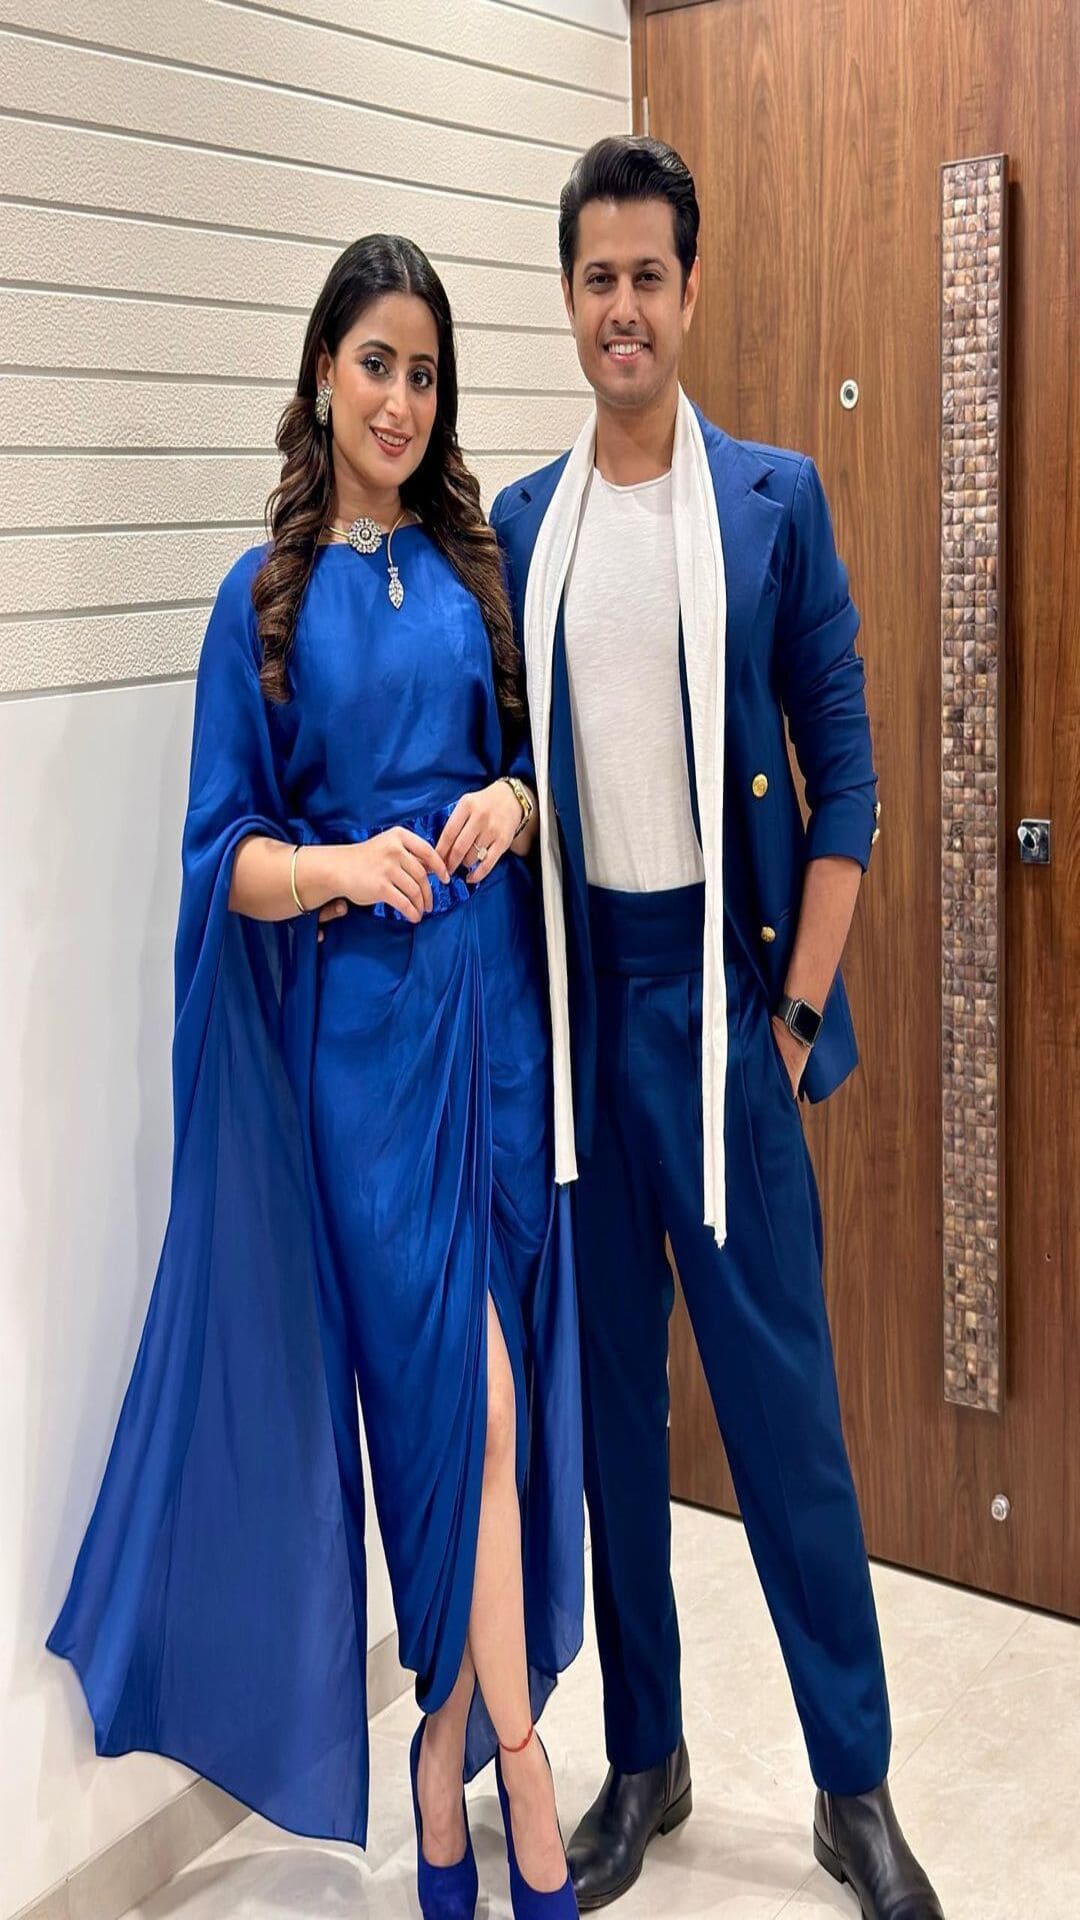 Buy Bgru Matching Outfit for Couple, Bgru Couple Outfit, Bgru Couple Dress,  Bgru Family Outfits, Couples Dress, Couple Party Dress. Online in India -  Etsy